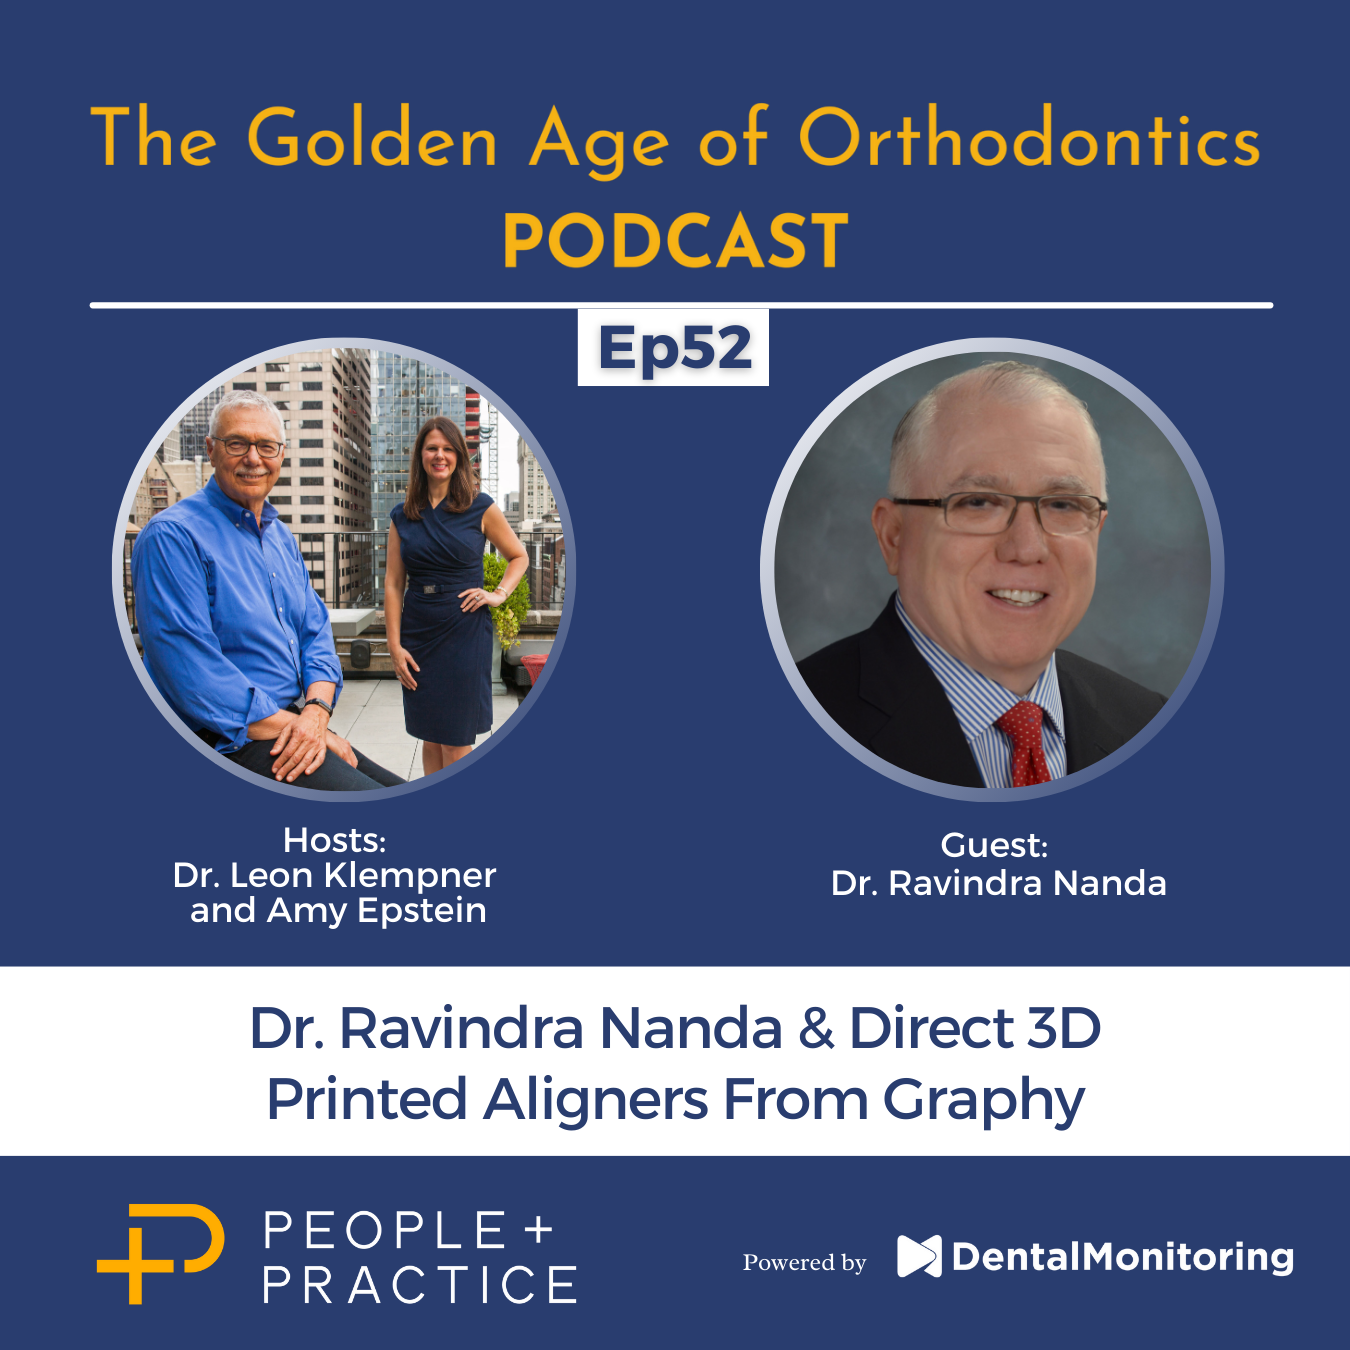 Dr. Ravindra Nanda & Direct 3D Printed Aligners From Graphy